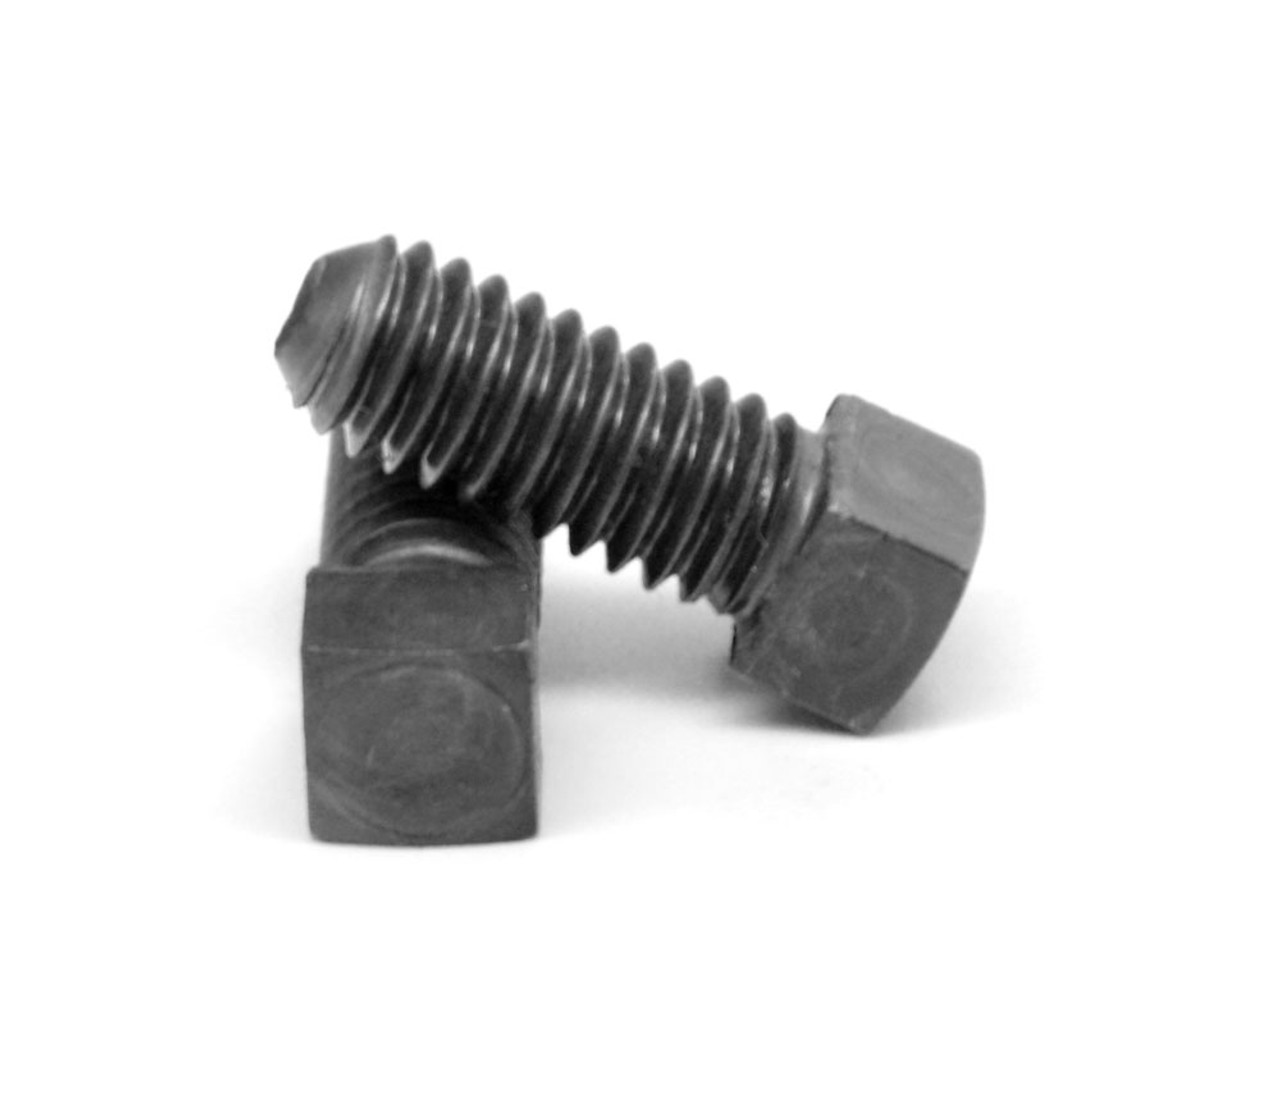 5/16"-18 x 7/8" (FT) Coarse Thread Square Head Set Screw Cup Point Low Carbon Steel Case Hardened Plain Finish